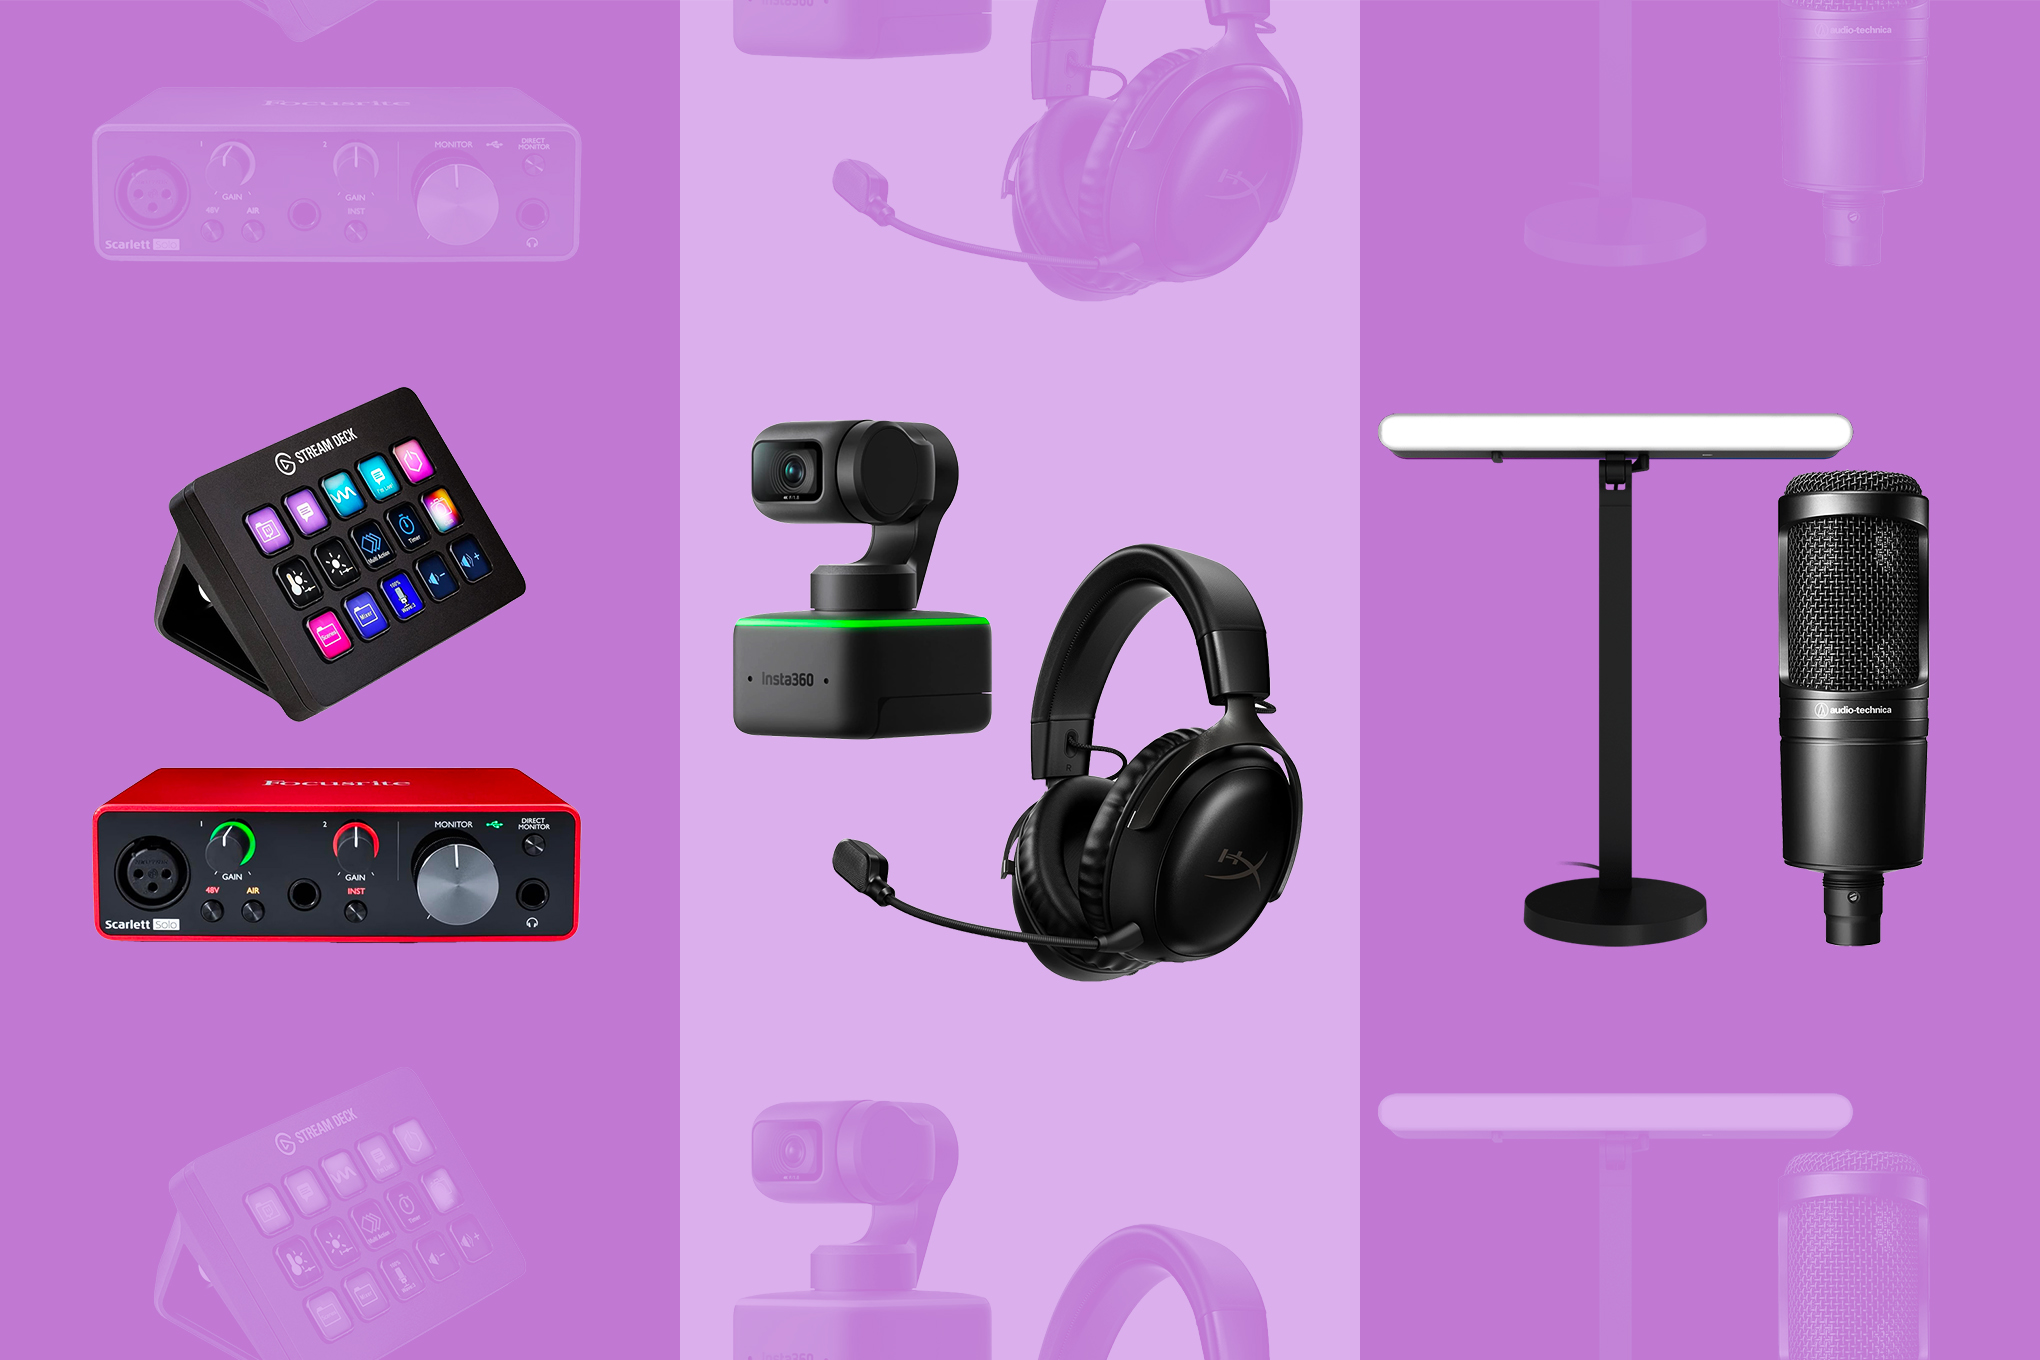 An image with multiple products arranged from left to right, including the Elgato Stream Deck, an XLR audio interface for microphones and headphones, Insta360 Linke webcam, HyperX Cloud III Wireless headset, Logitech’s Litra XL light, and an Audio-Technica XLR microphone.